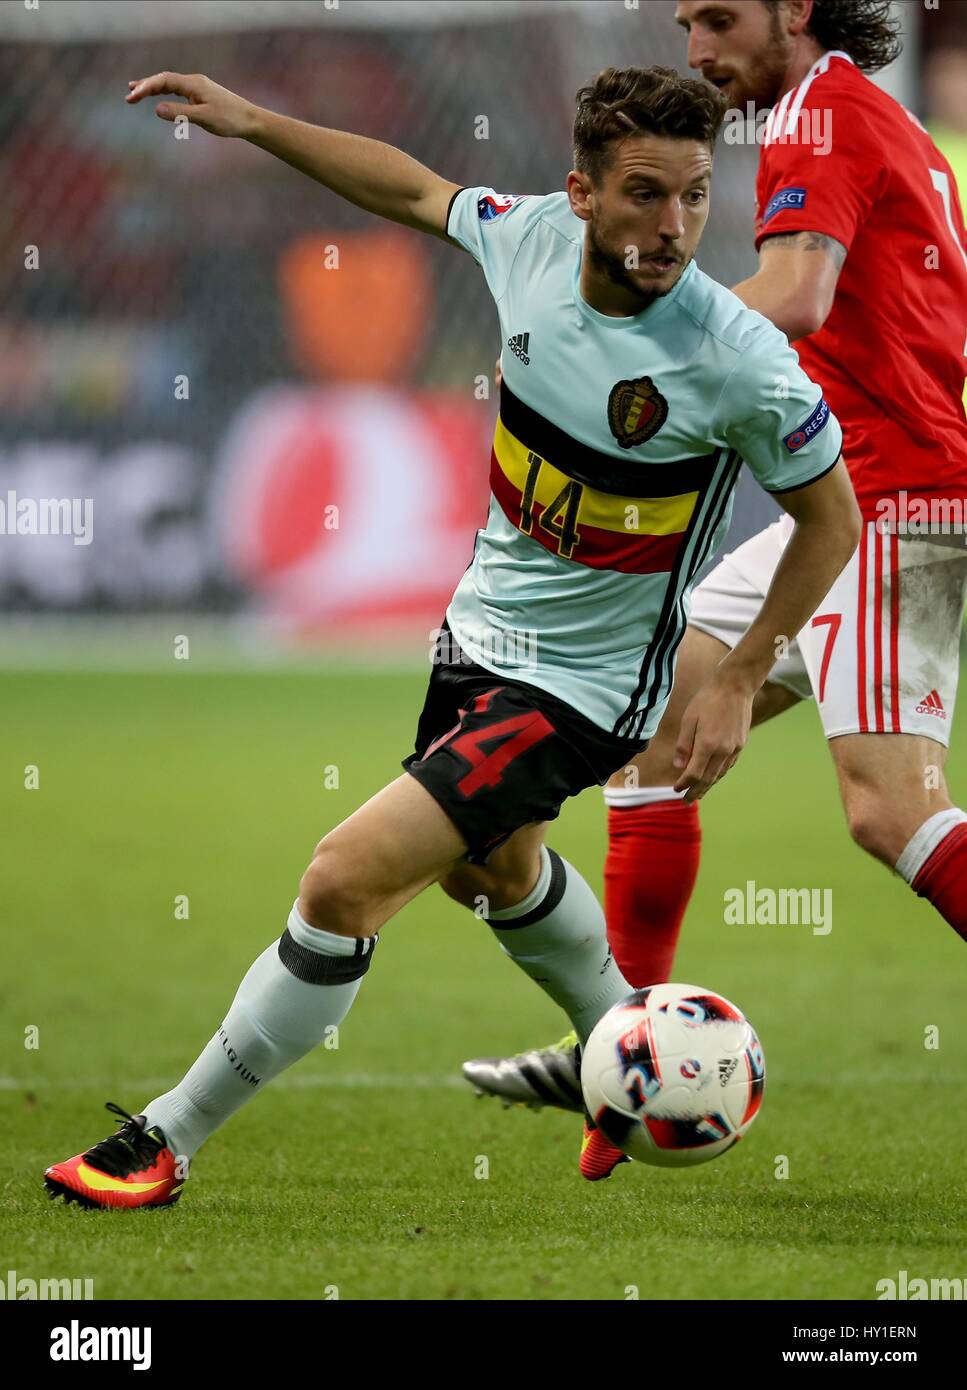 DRIES MERTENS BELGIUM STADE PIERRE-MAUROY LILLE FRANCE 01 July 2016 Stock Photo